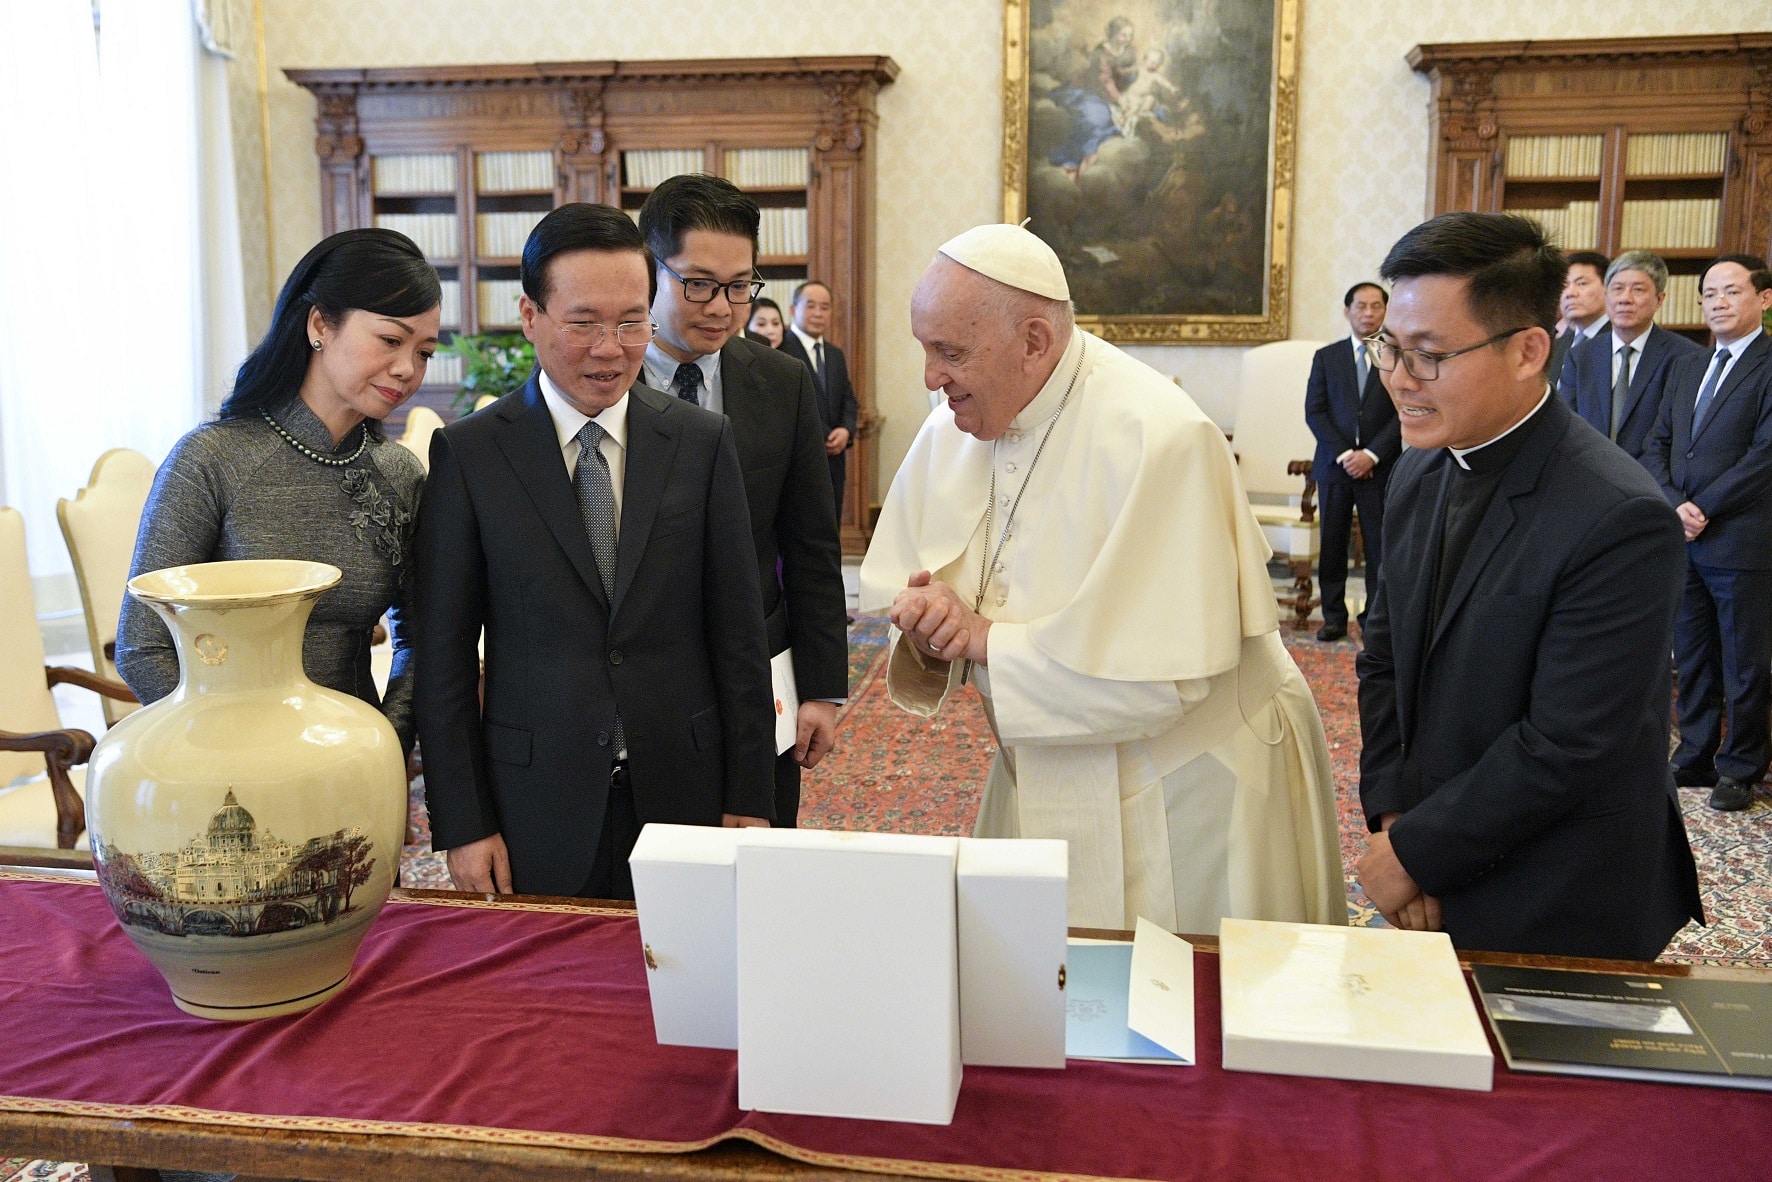 Pope Francis presents gifts to Vietnamese President Vo Van Thuong and First Lady Phan Thi Thanh Tam during a meeting at the Vatican July 27, 2023. (CNS photo/Vatican Media)